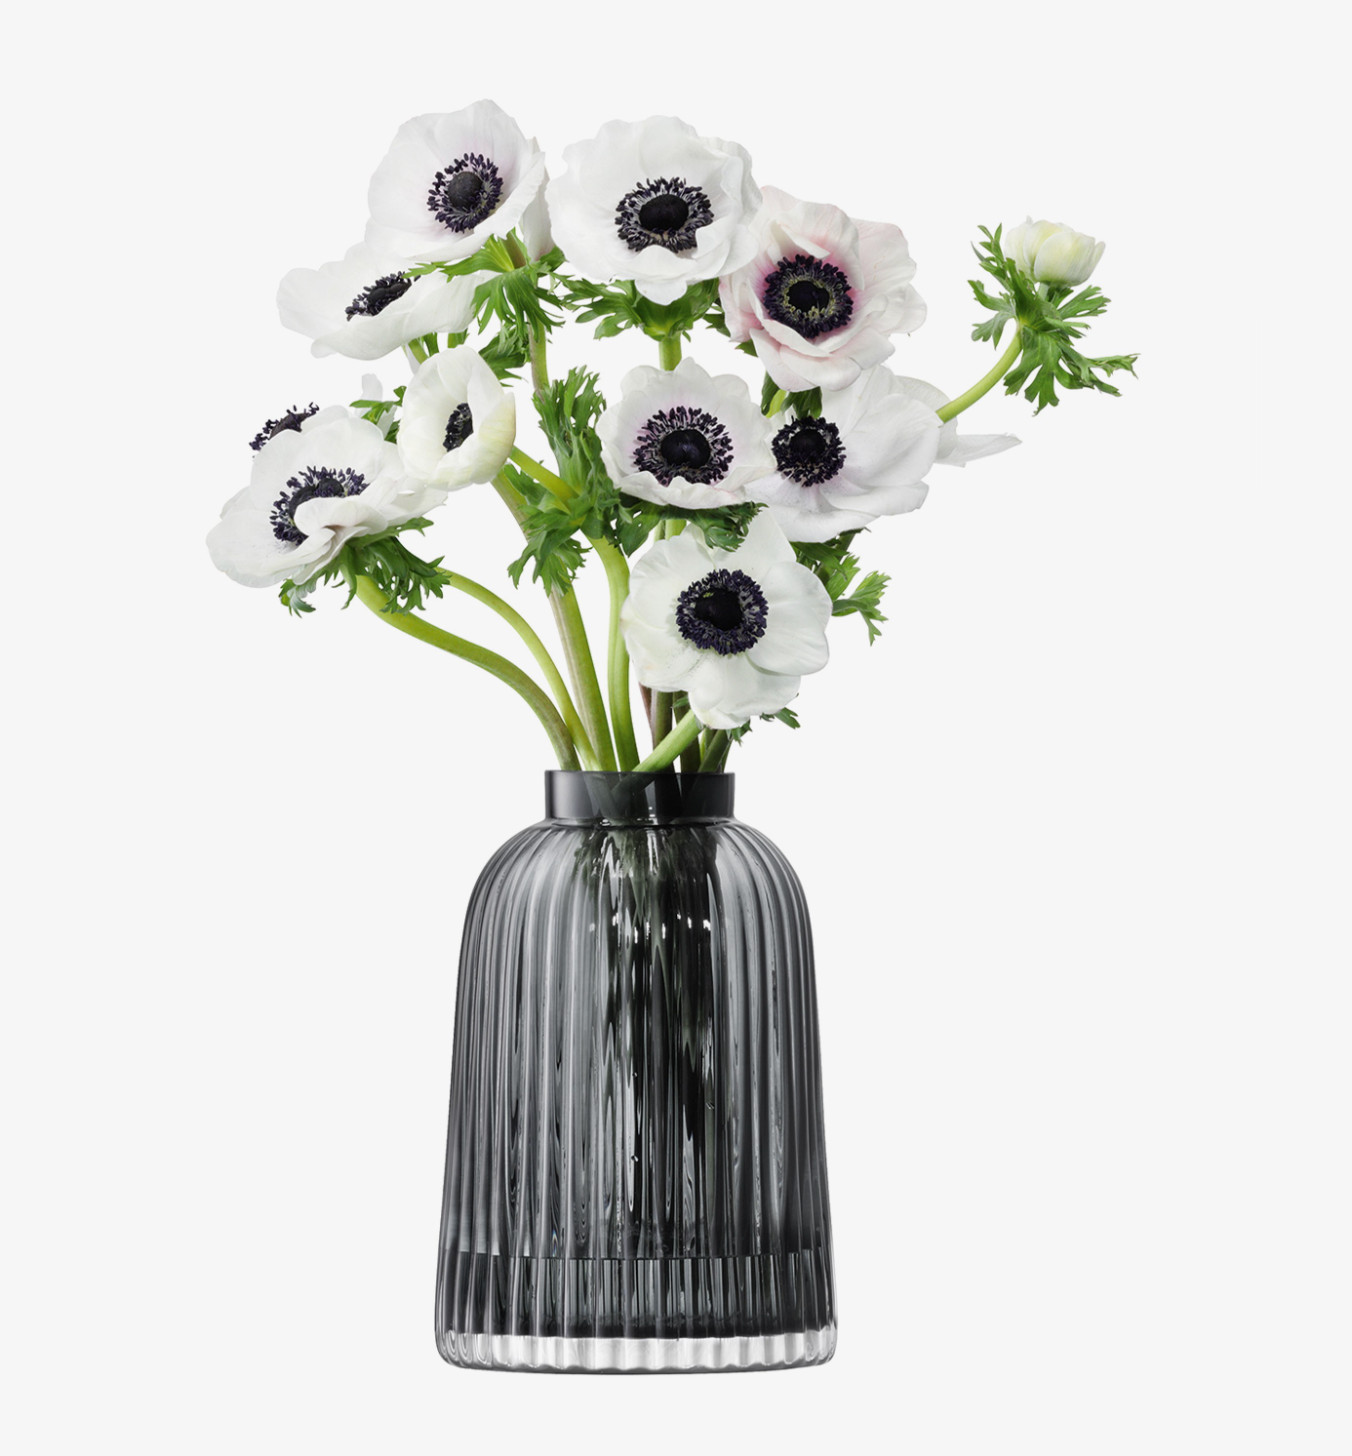 VASE GLASS GREY (Available in 2 Sizes)